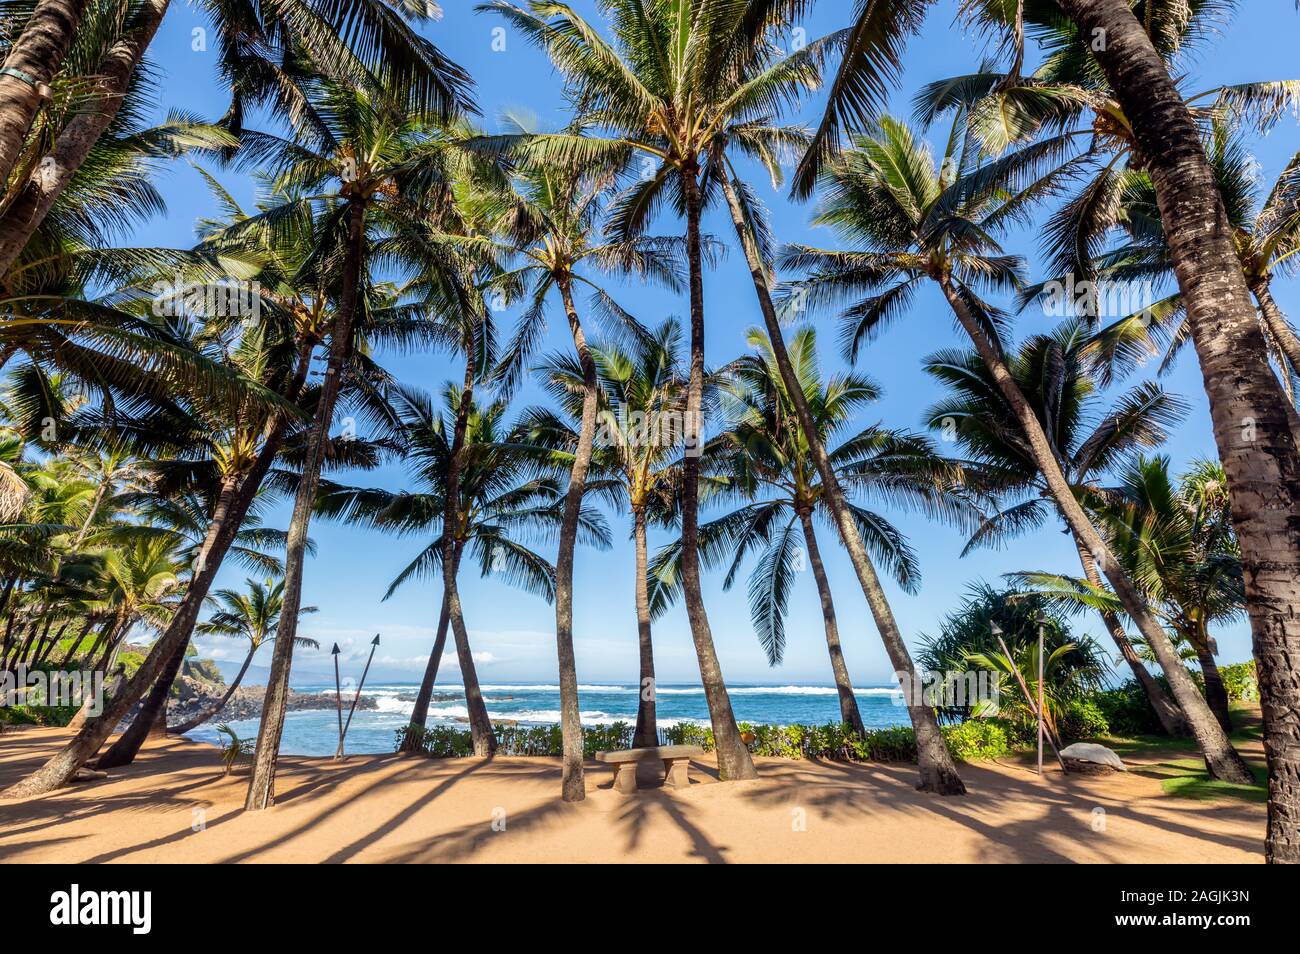 Lots of palm trees with the ocean in the background in Maui, Hawaii Stock Photo